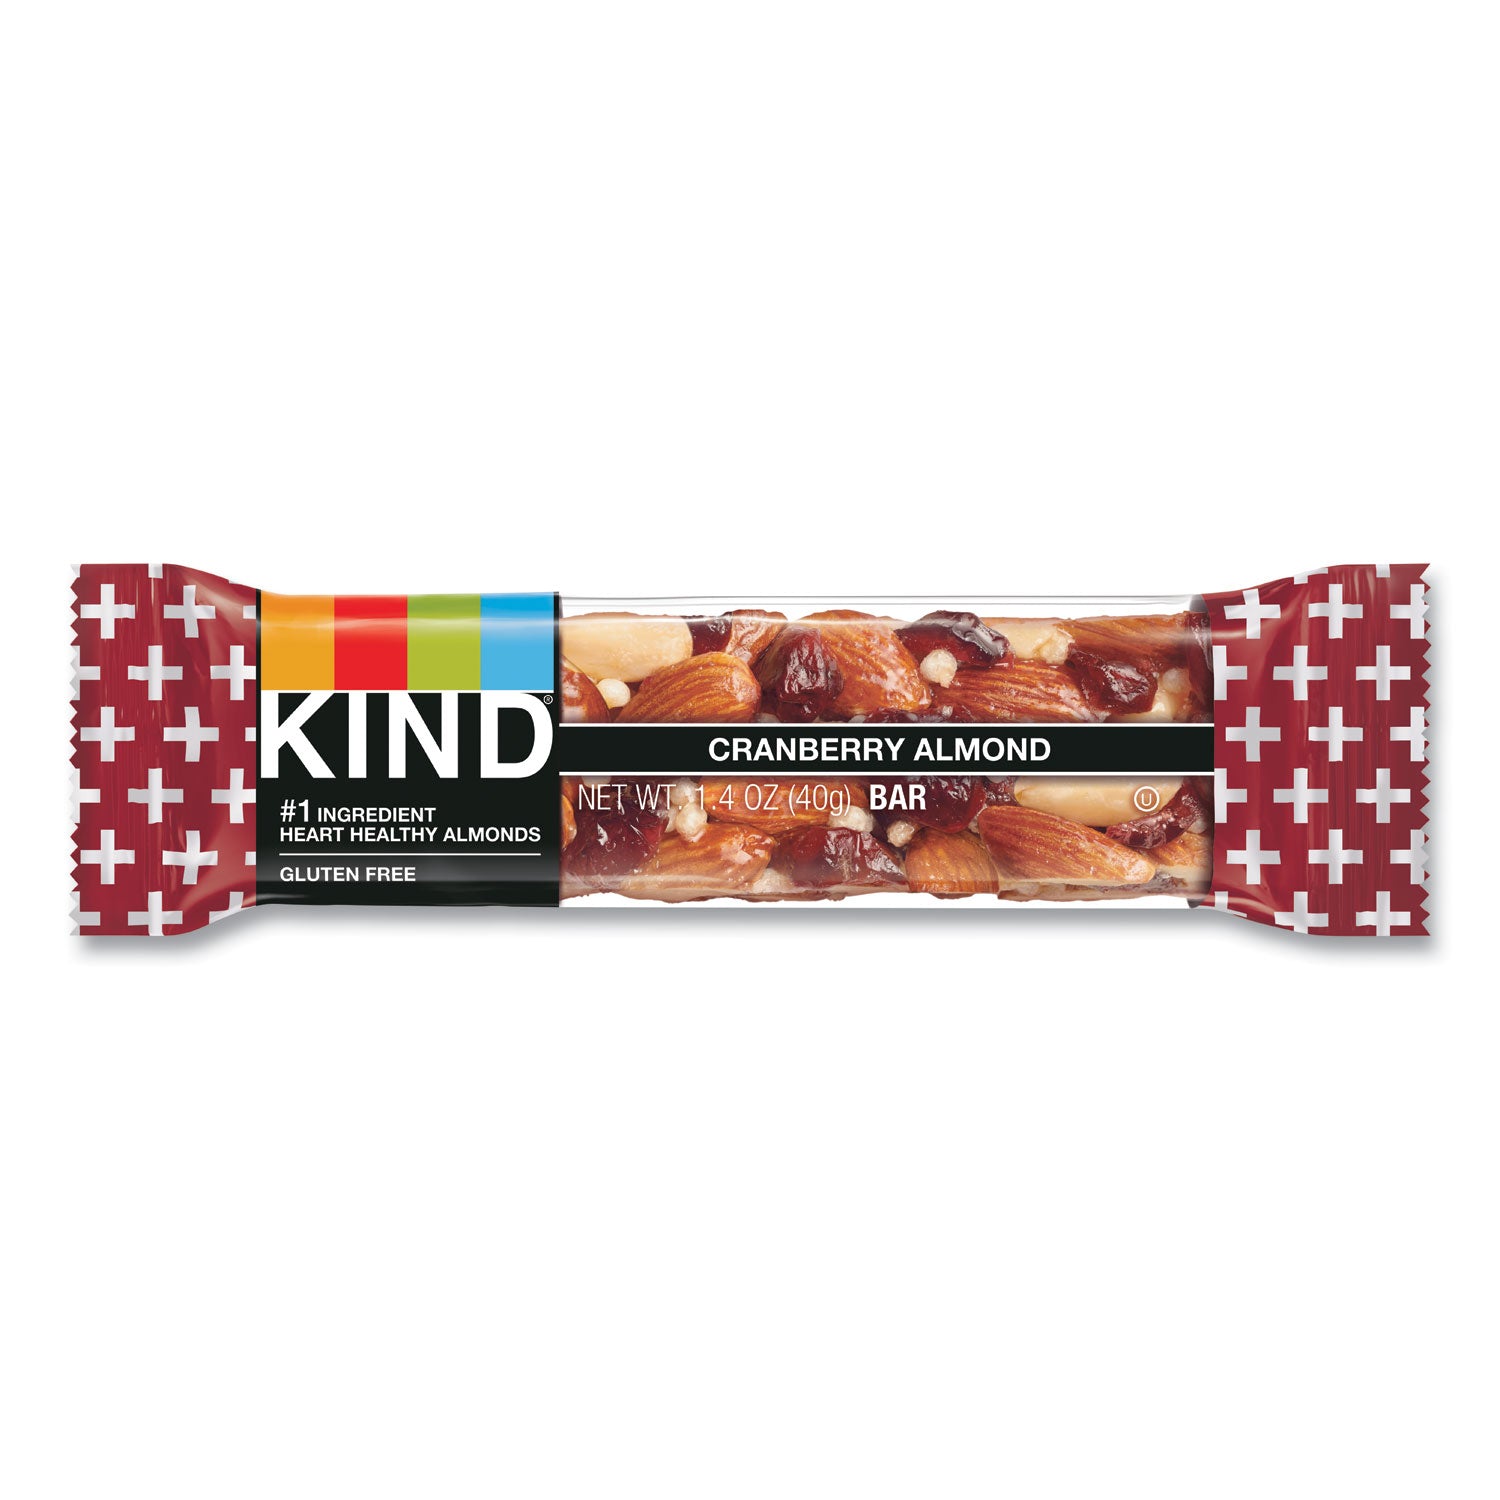 plus-nutrition-boost-bar-cranberry-almond-and-antioxidants-14-oz-12-box_knd17211 - 2